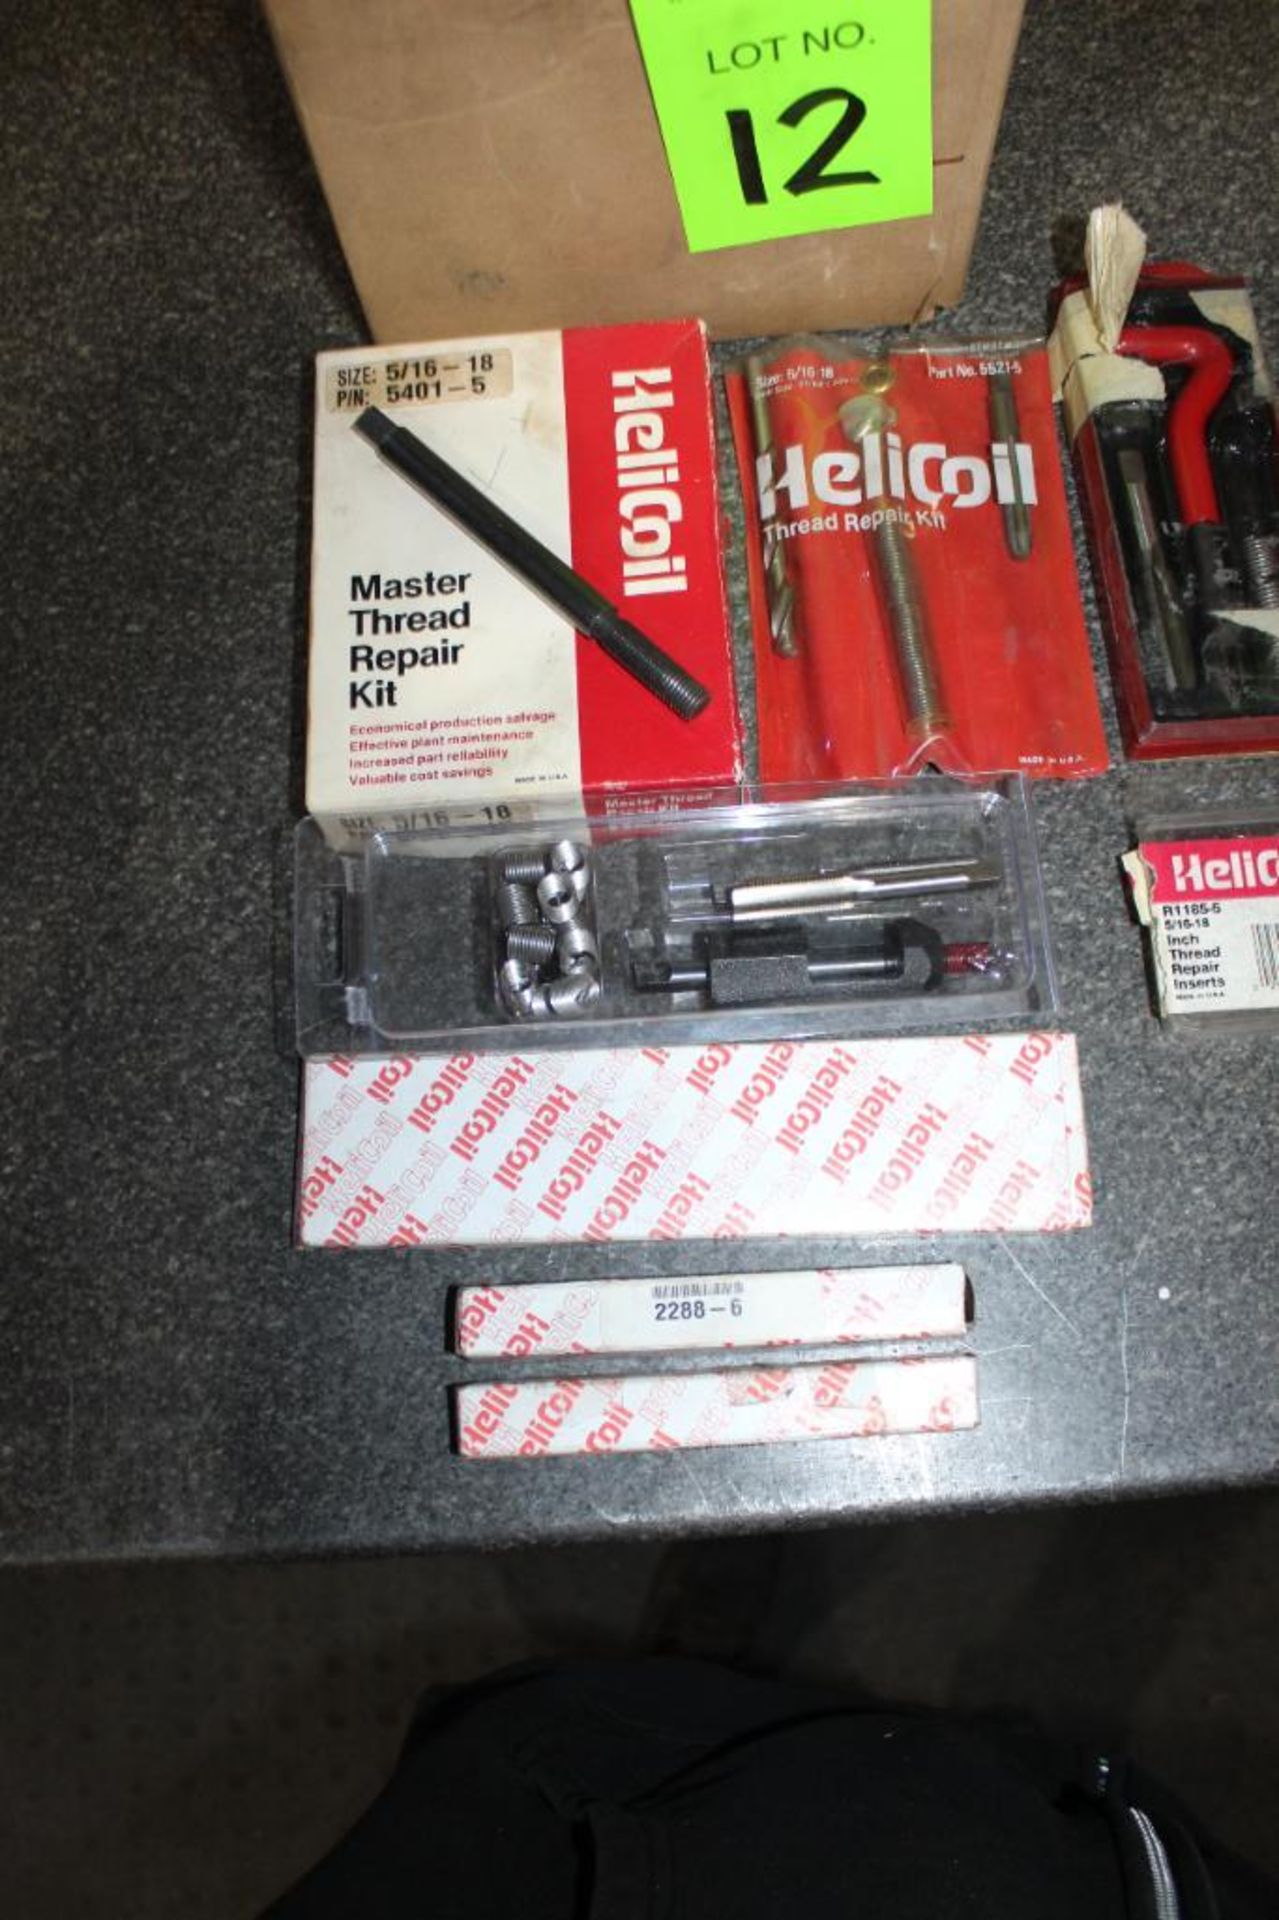 Lot of Assorted H-Coil Installation Tools and Helicoil Thread Repair Kit - Image 3 of 4